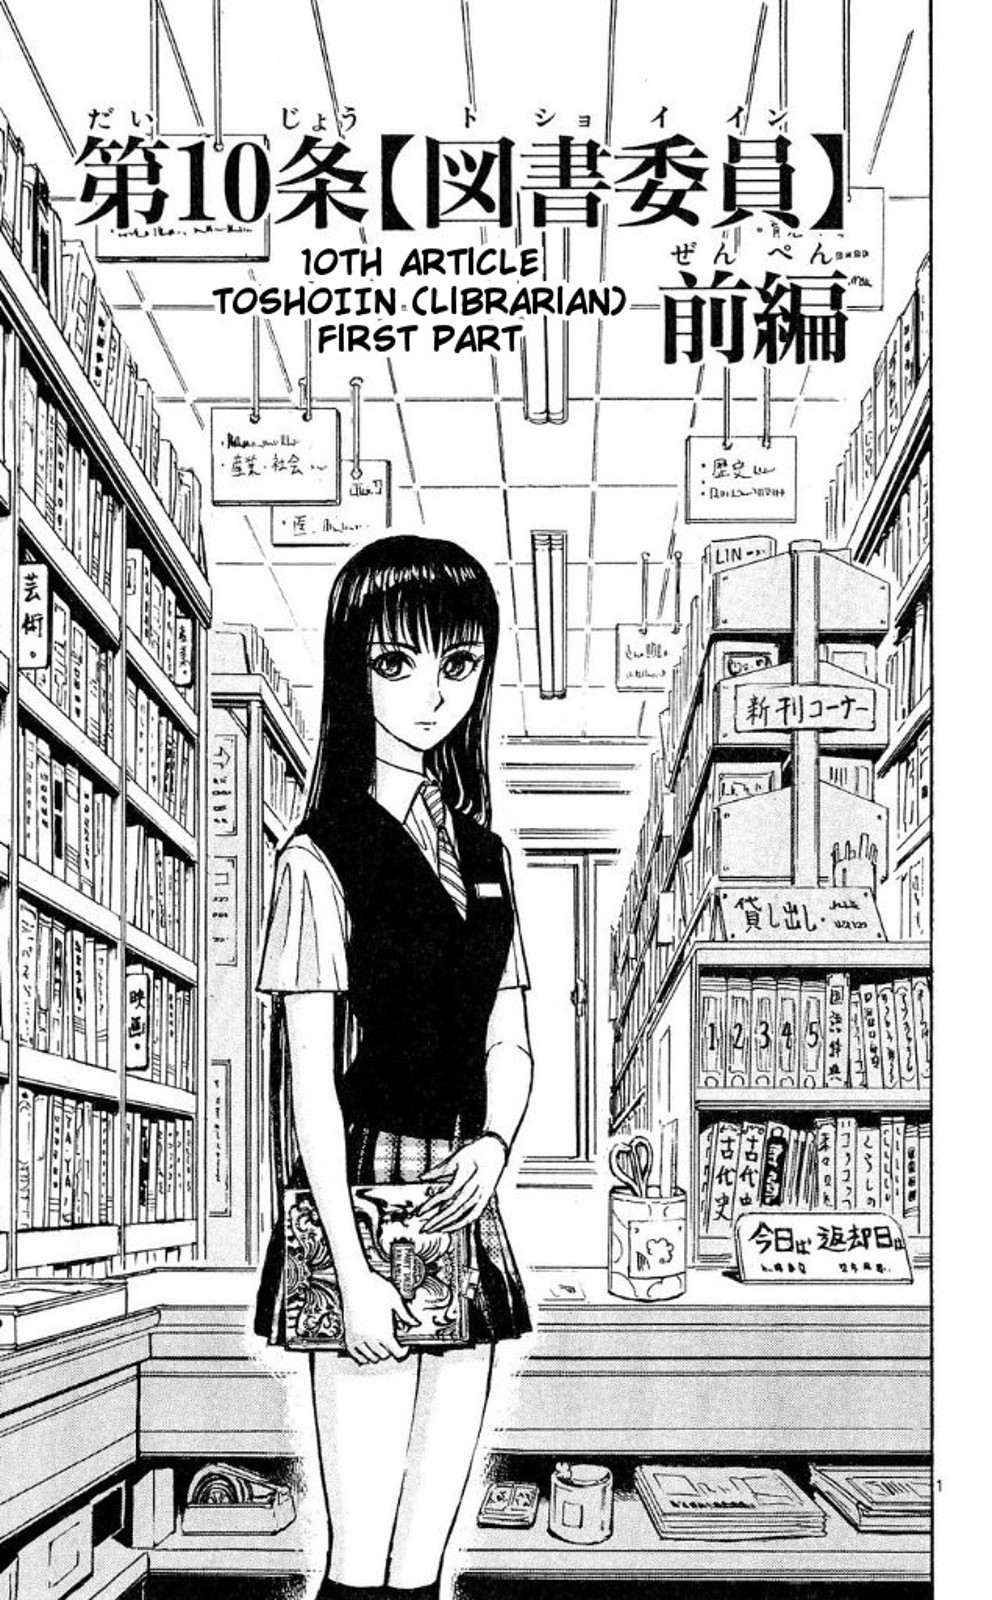 Moonlight Act Vol. 5 Ch. 37 10th Article Librarian (First Part)